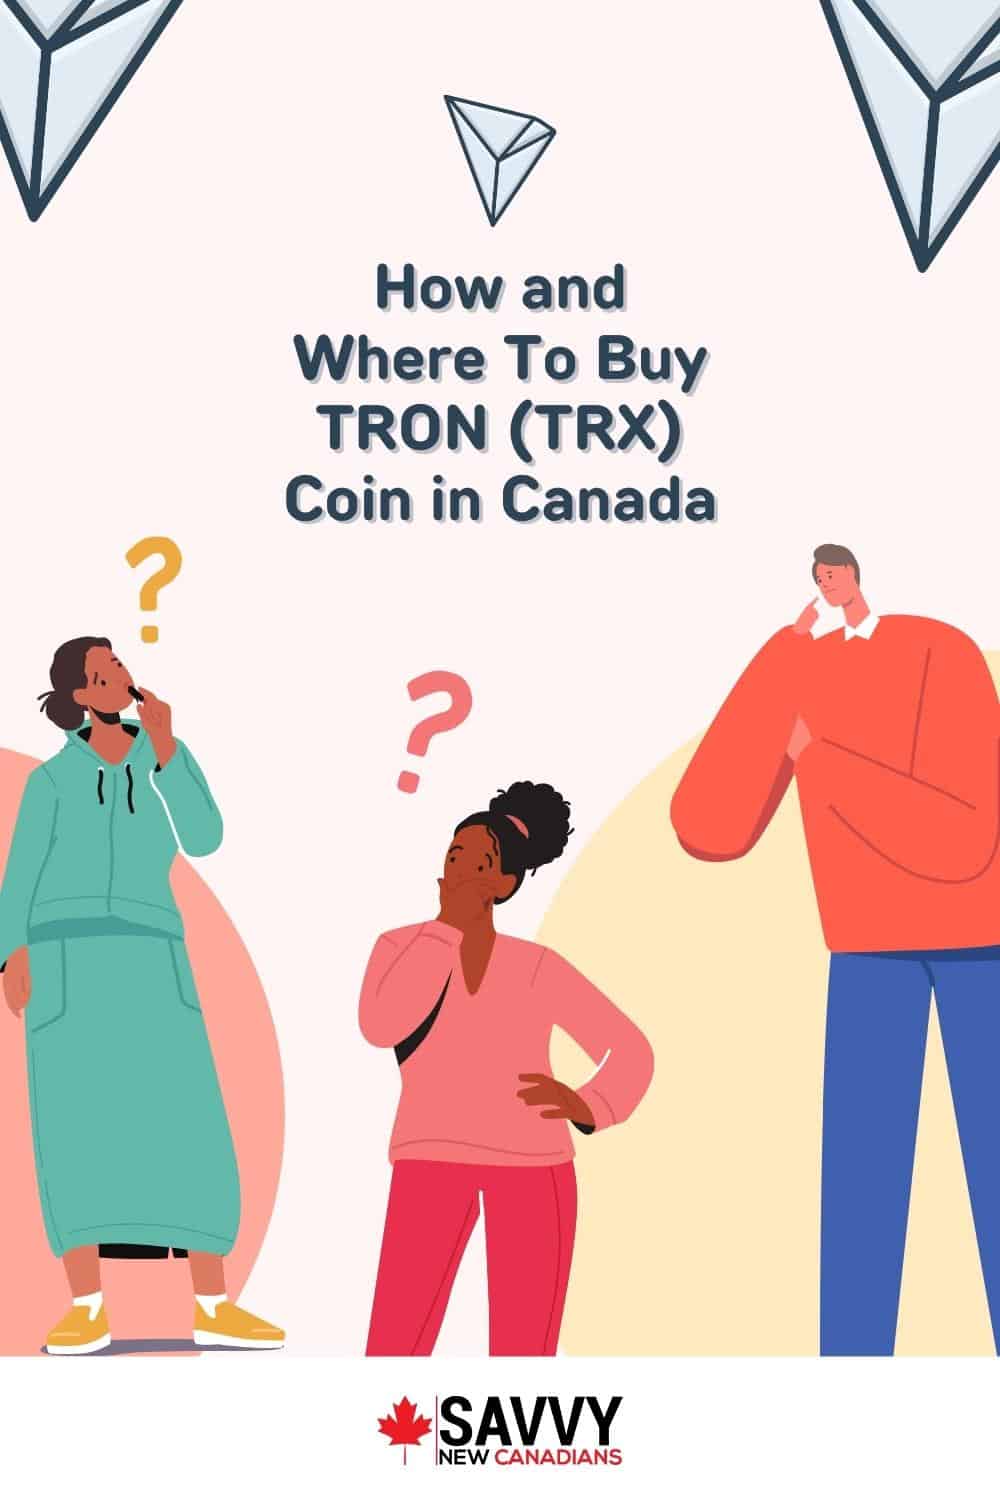 How and Where To Buy TRON (TRX) Coin in Canada 2022